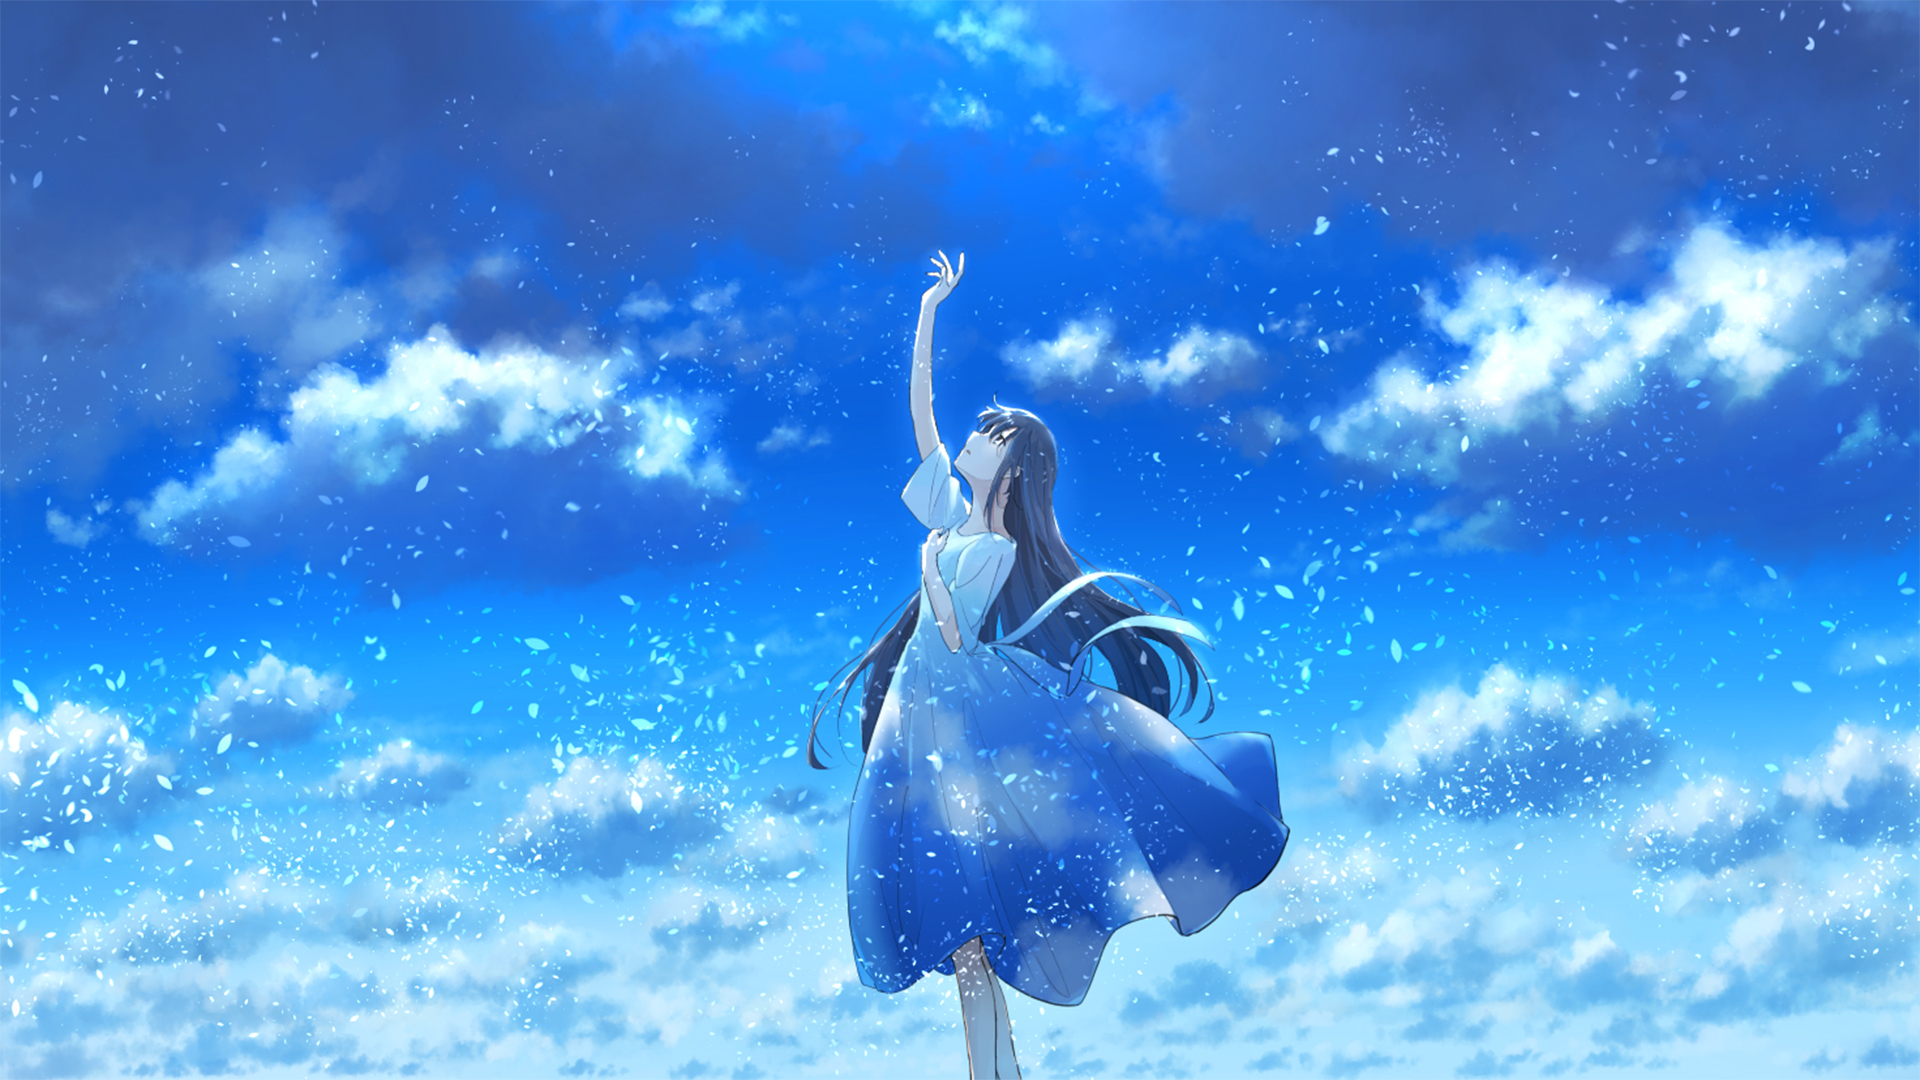 Sky Anime Long Hair Dark Hair Dress Clouds Looking Up Profile Petals One Arm Up Windy Anime Girls 1920x1080